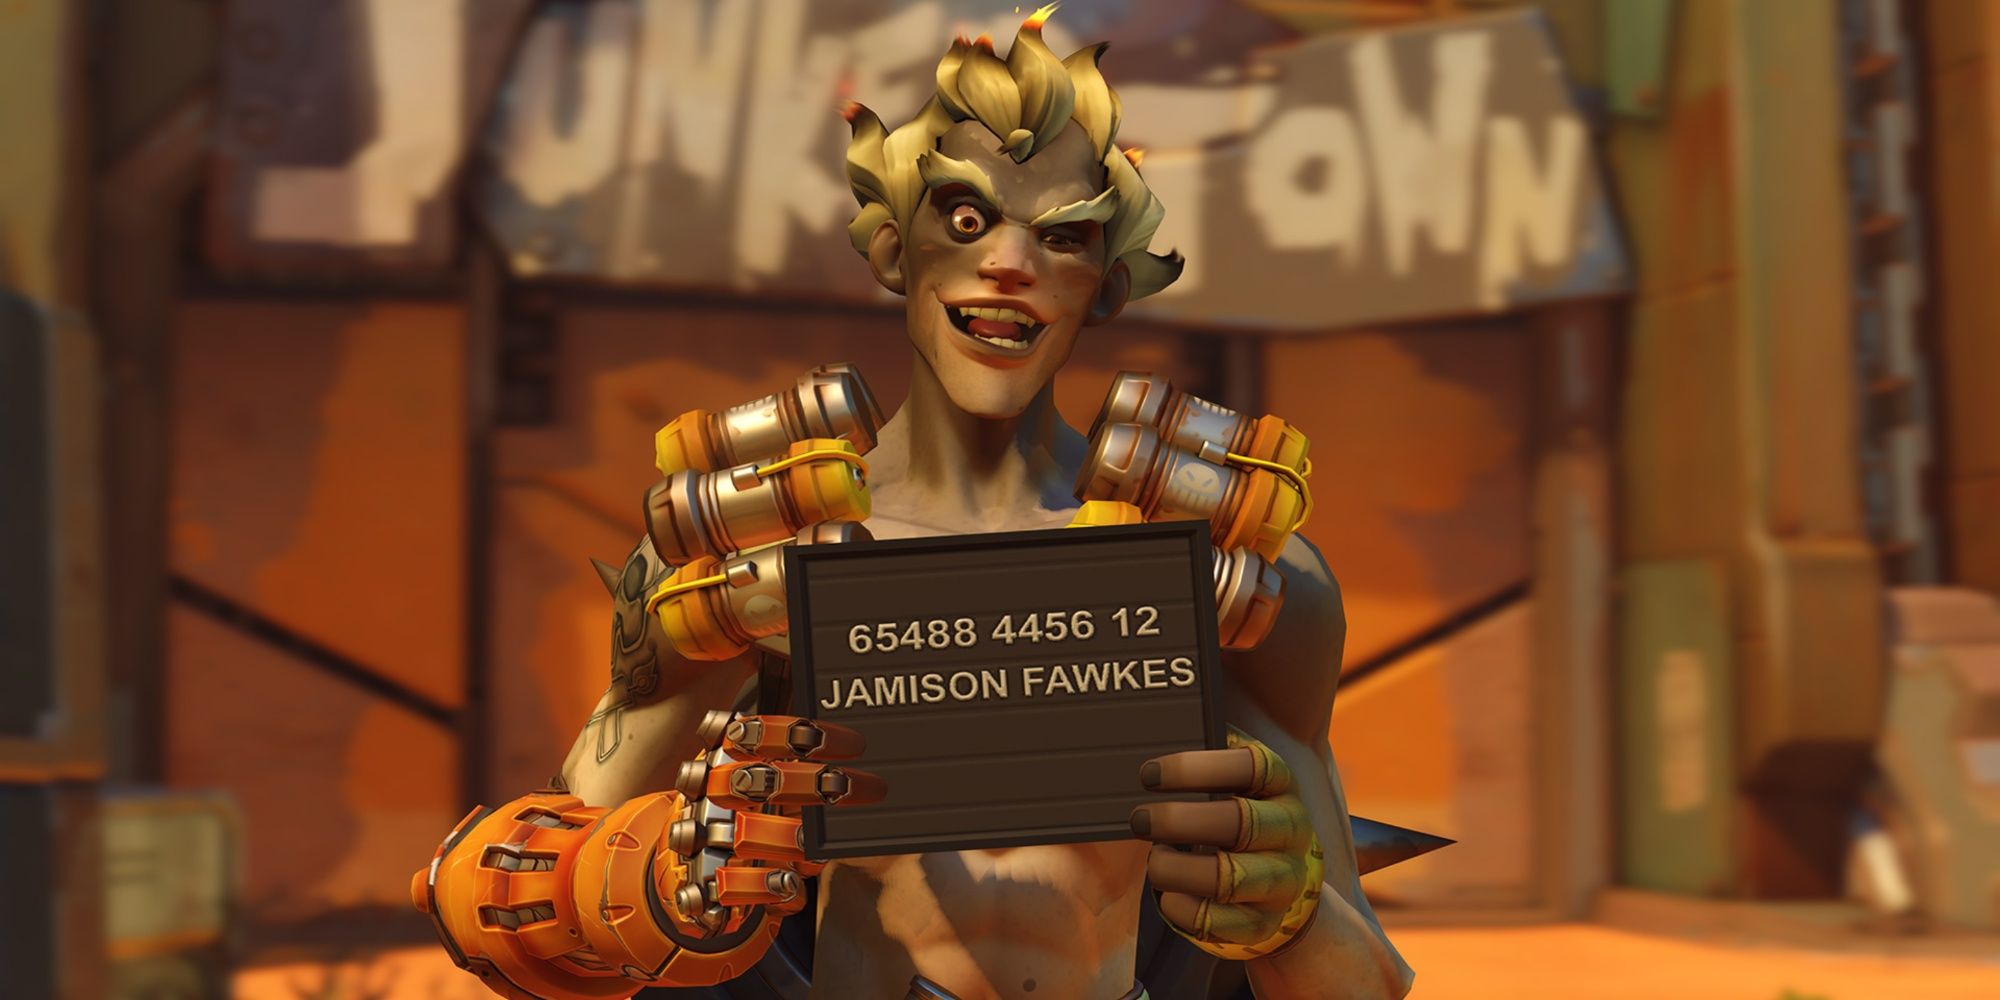 Overwatch 2 Junkrat holds a sign with his legal name, Jamison Fawkes.